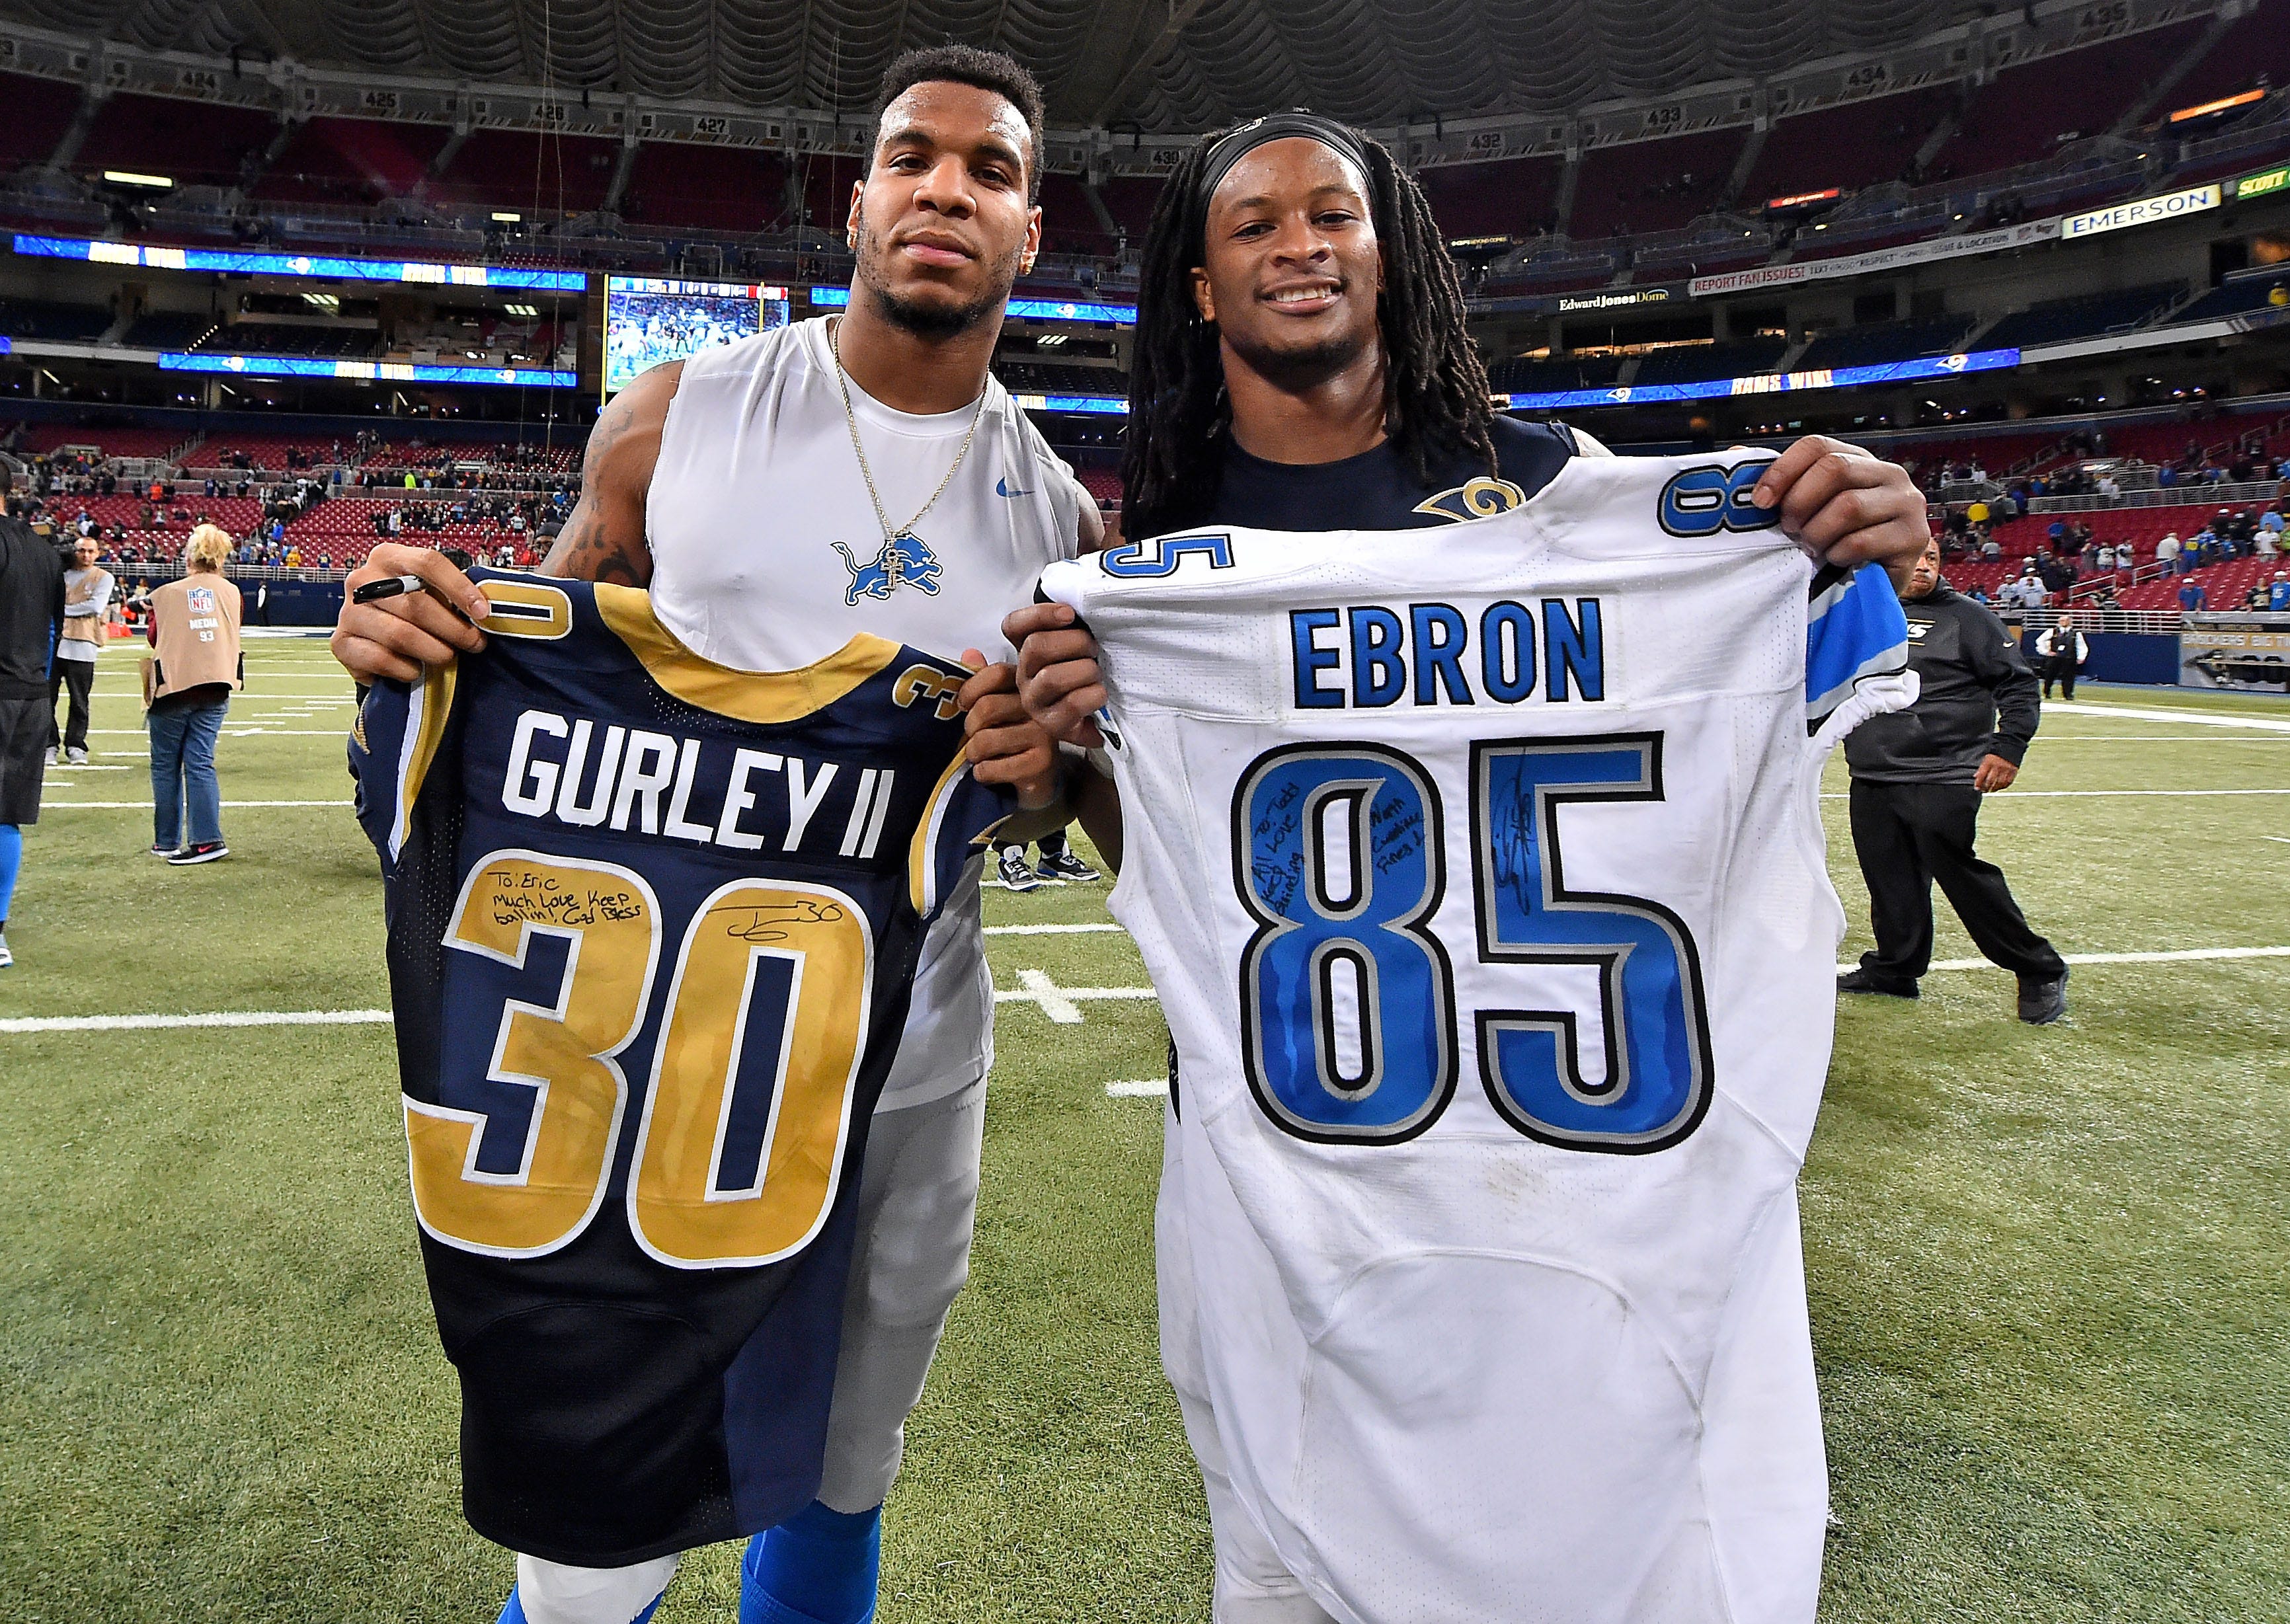 NFL players in jersey-swapping craze